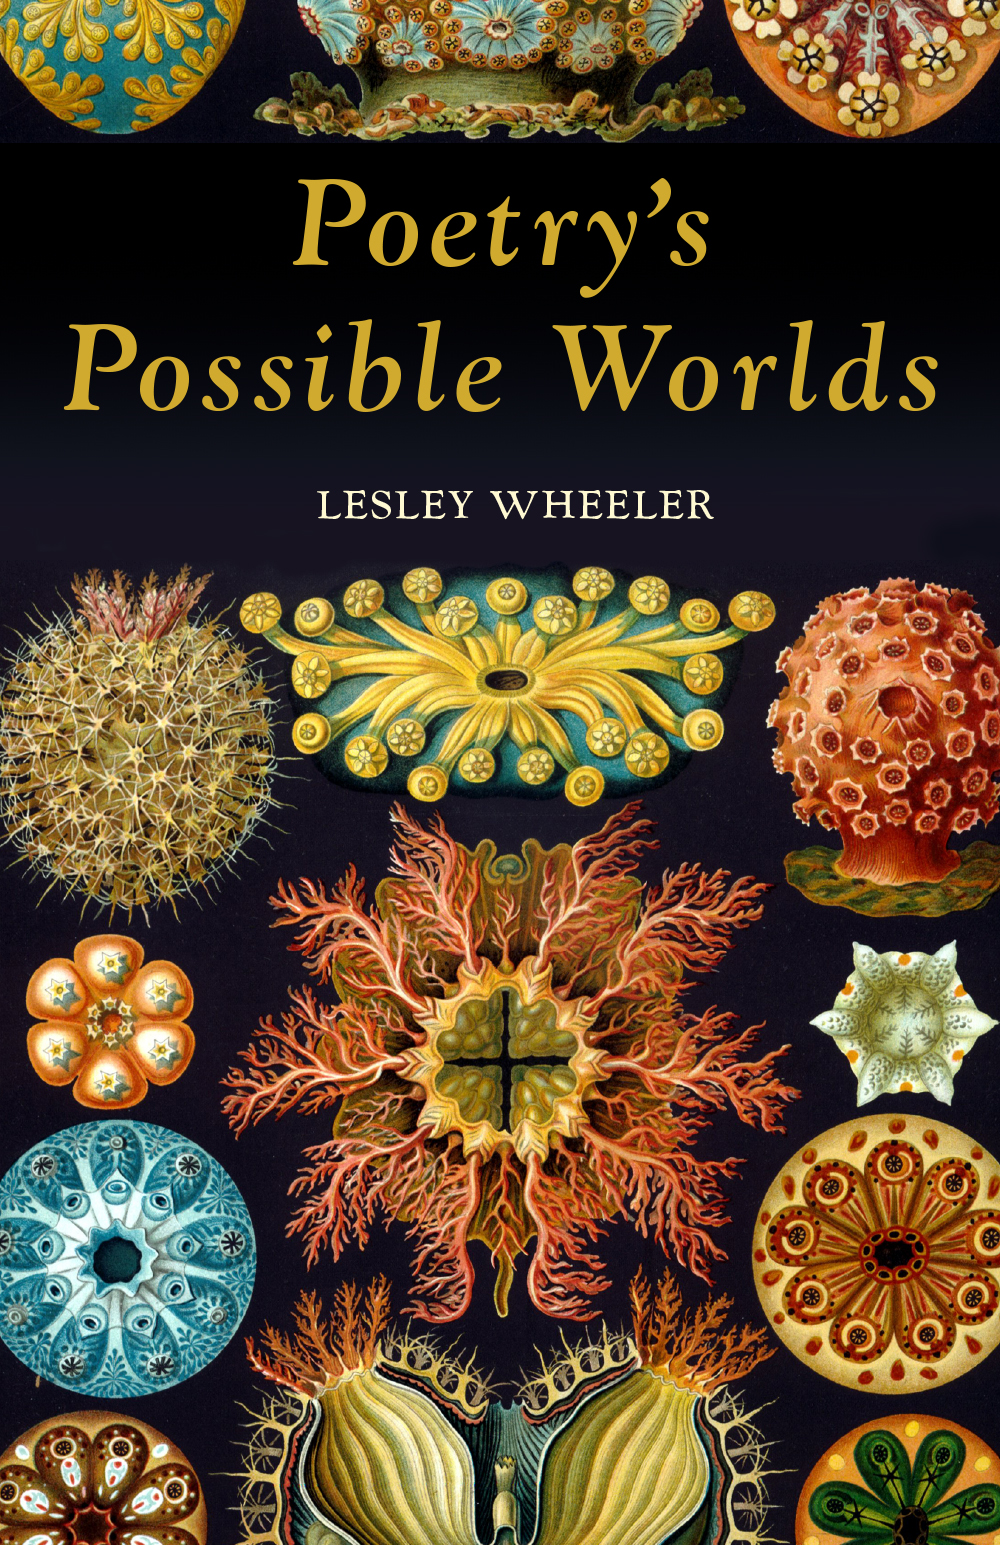 Cover of Poetry's Possible Worlds by Lesley Wheeler, showing colorful illustrations of plant life against a black background